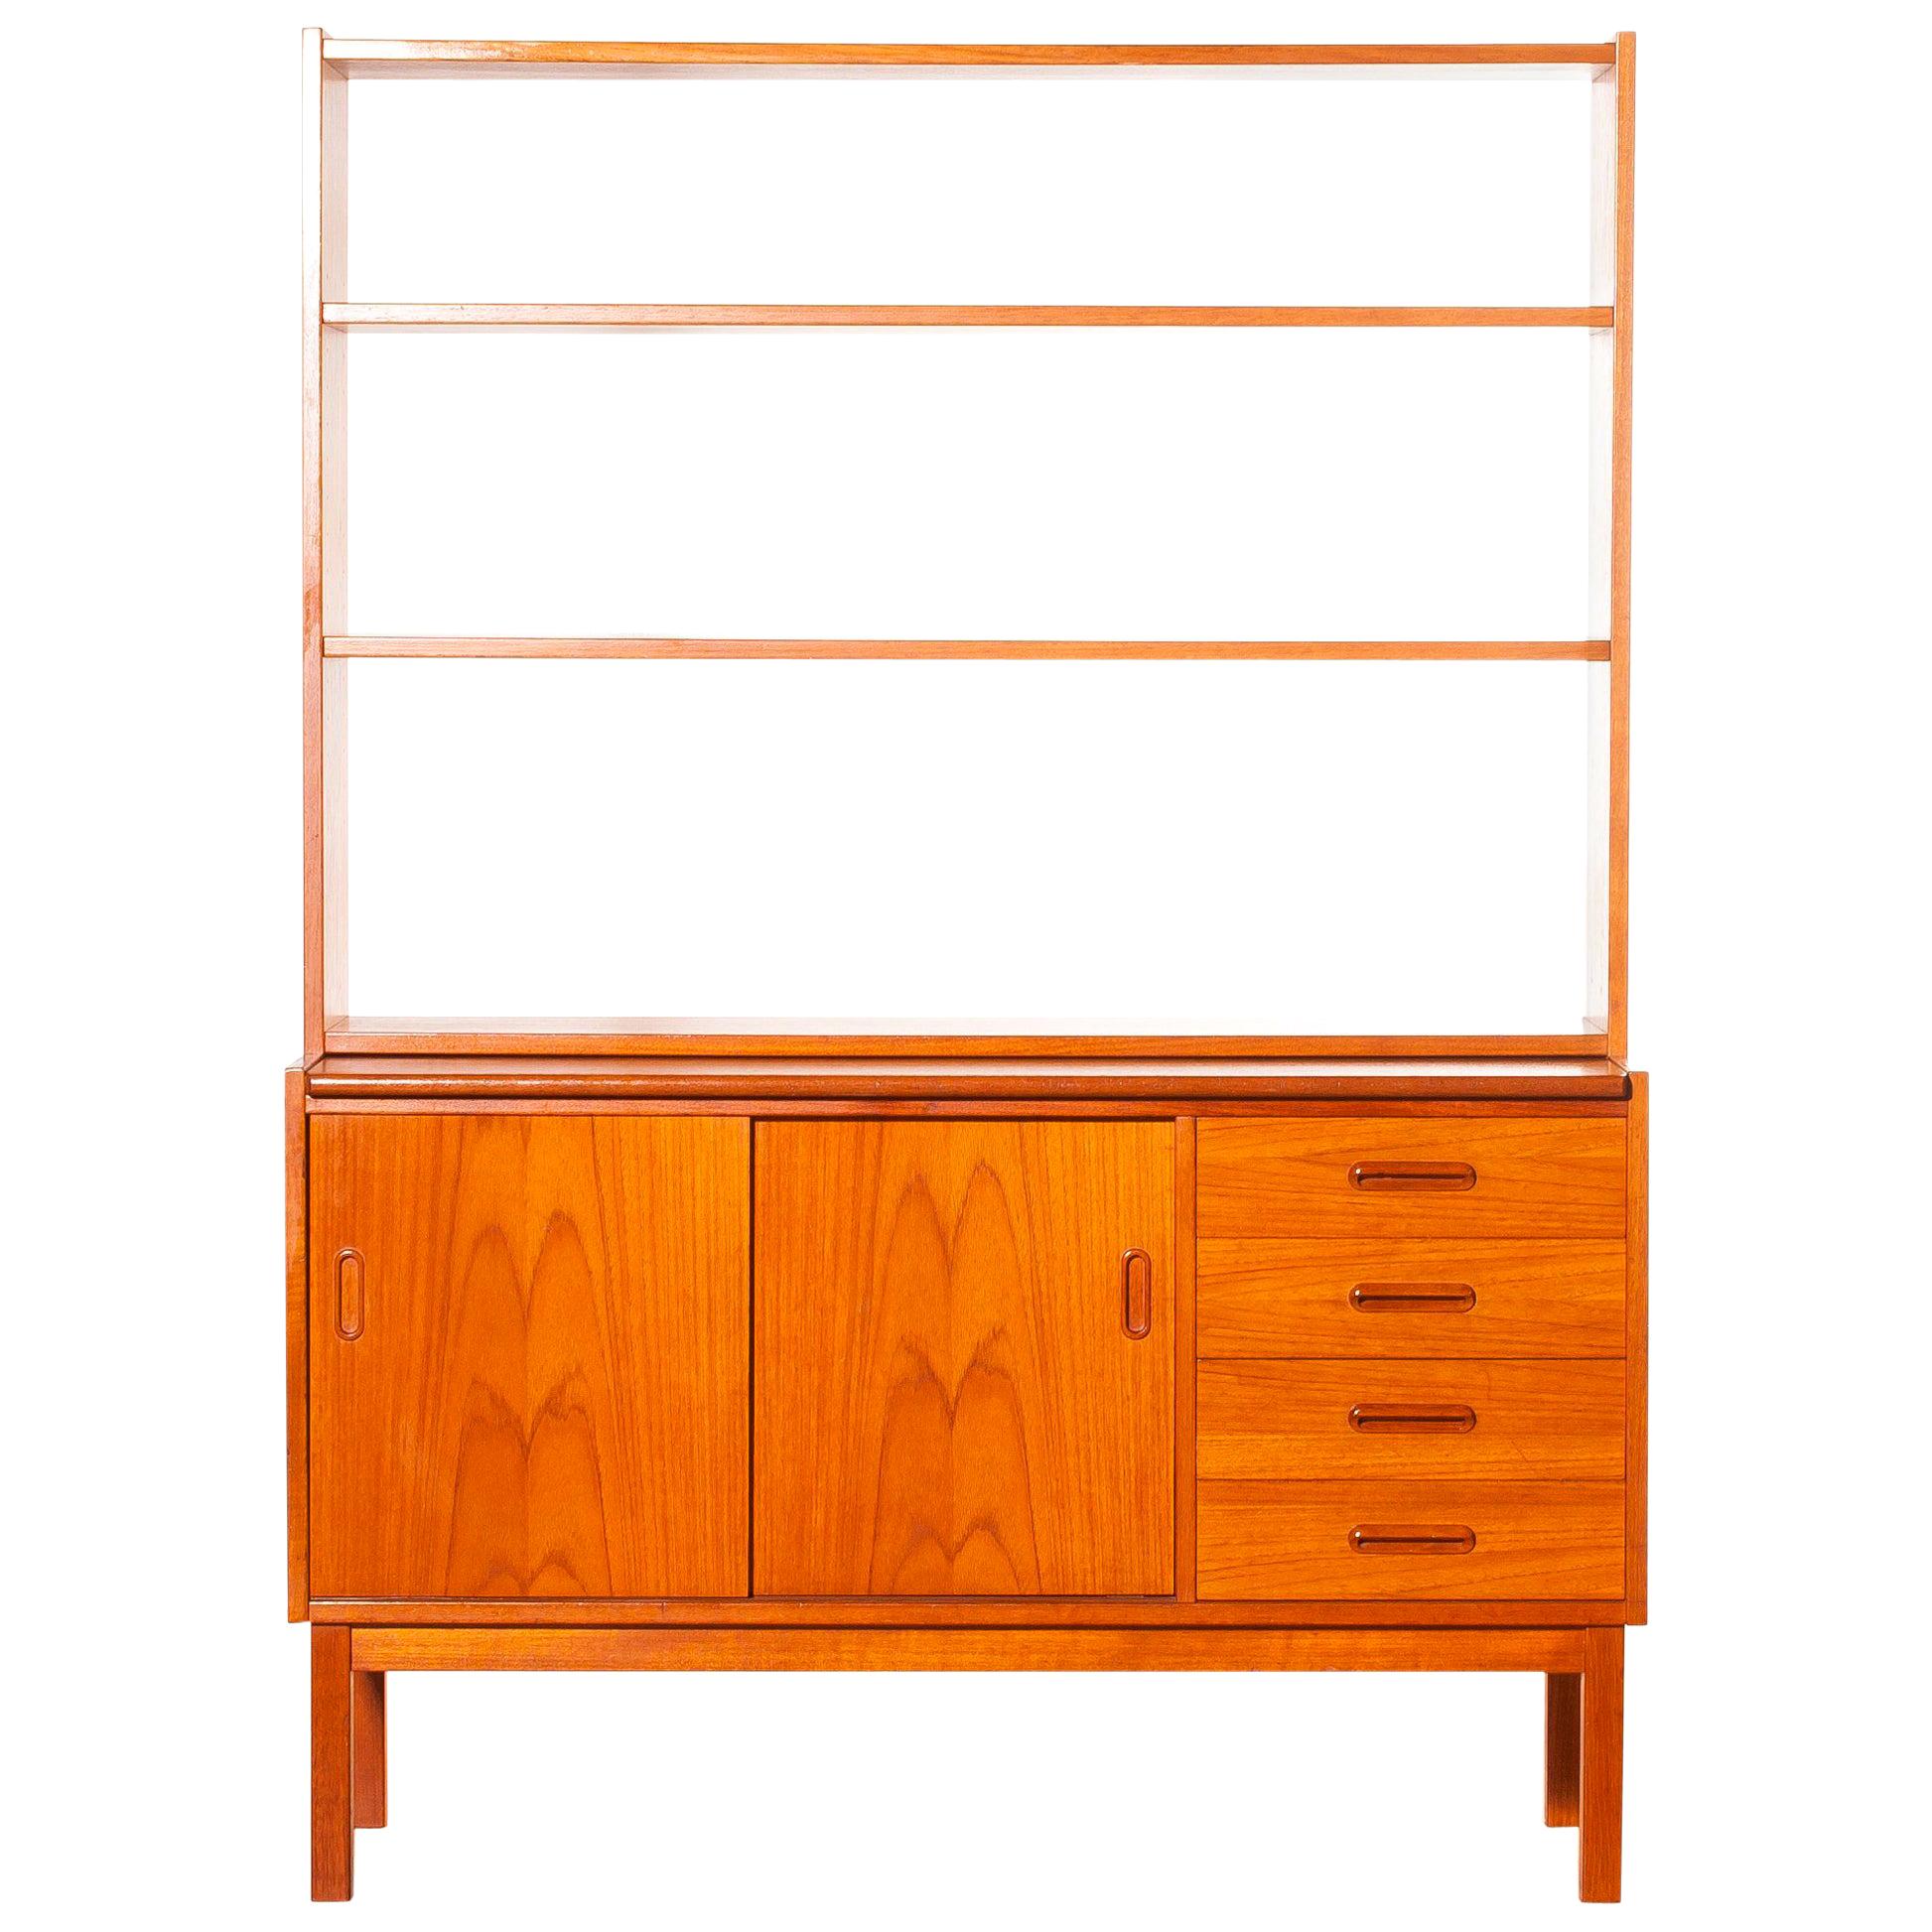 Swedish 1960s, Teak Bookcase with Slidable Writing or Working Space from Sweden